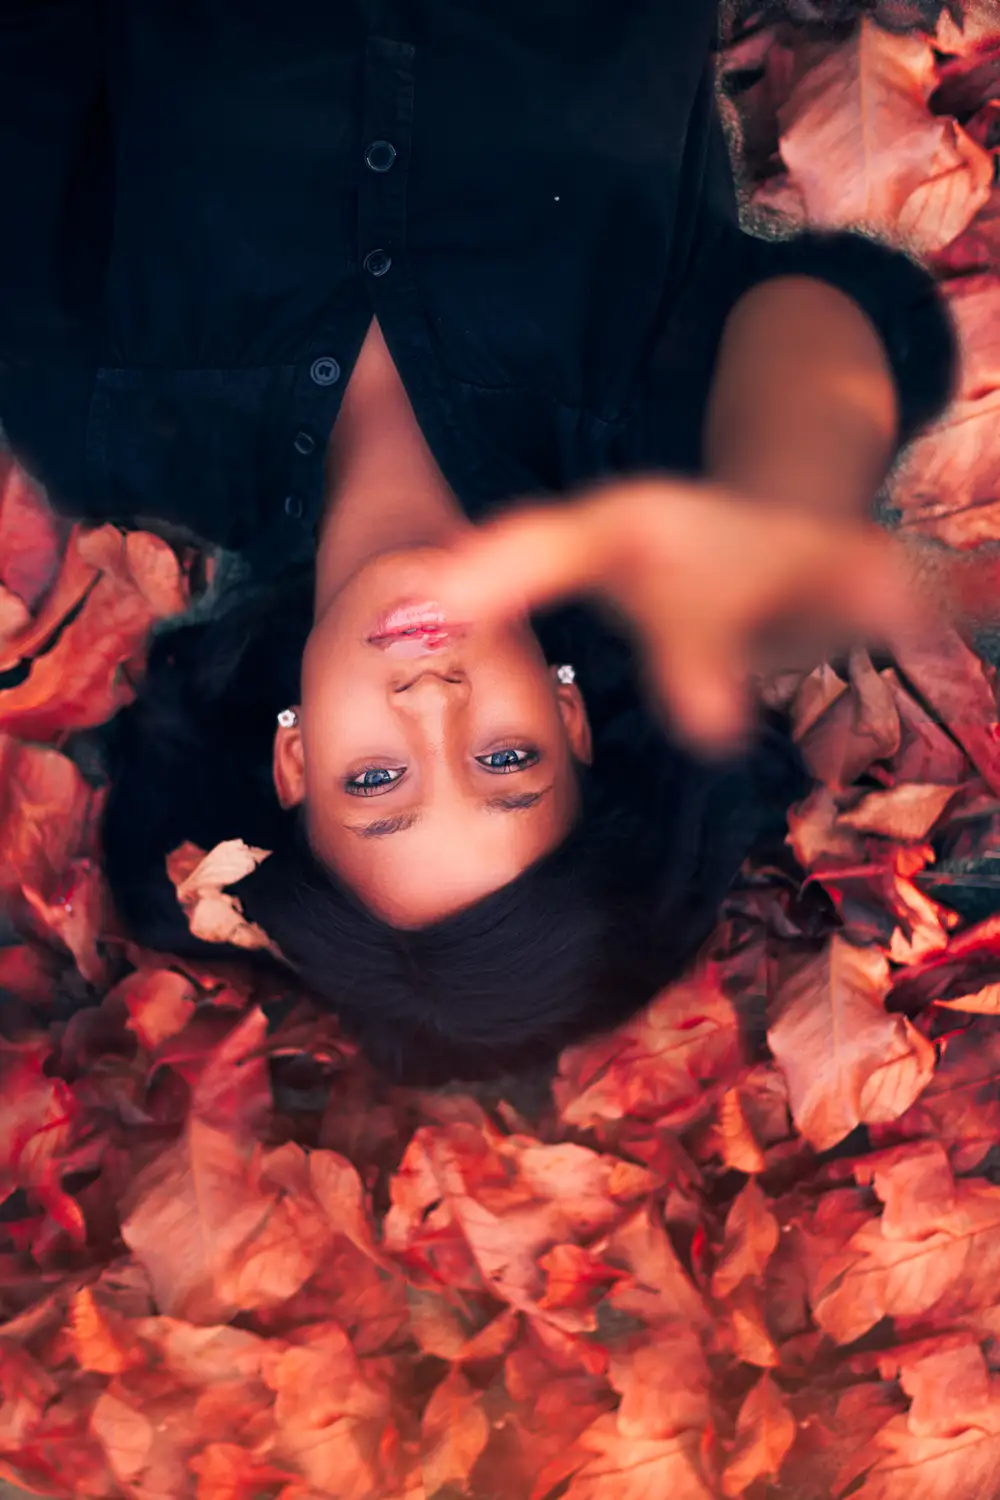 Face model laying down in red leaves